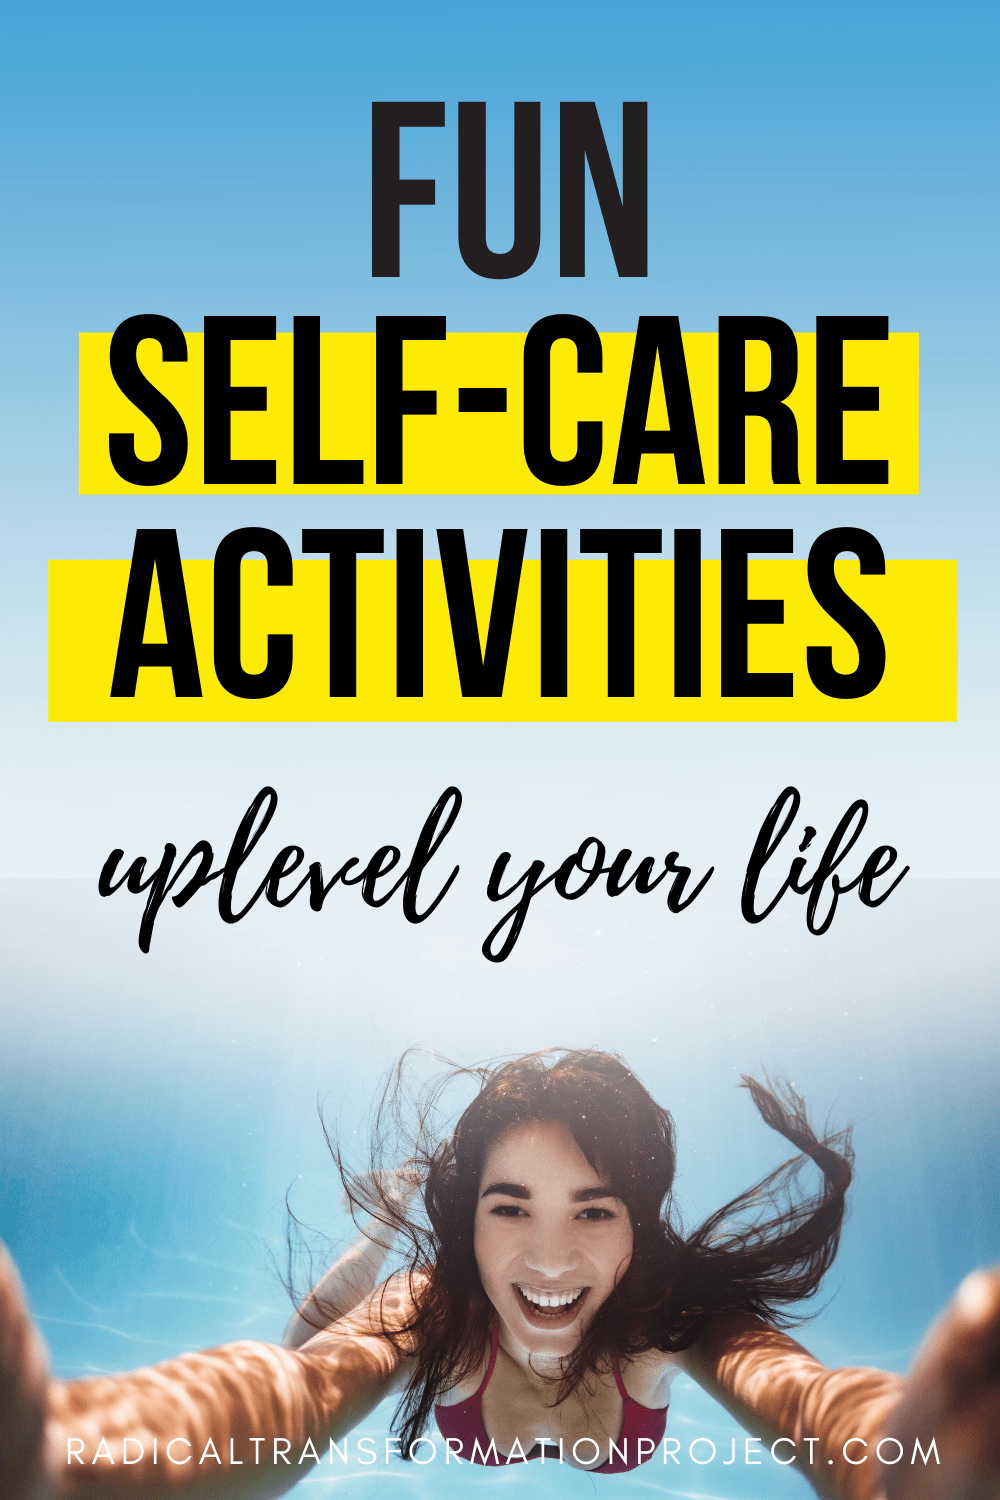 31 Fun Self-Care Activities To Do At Home